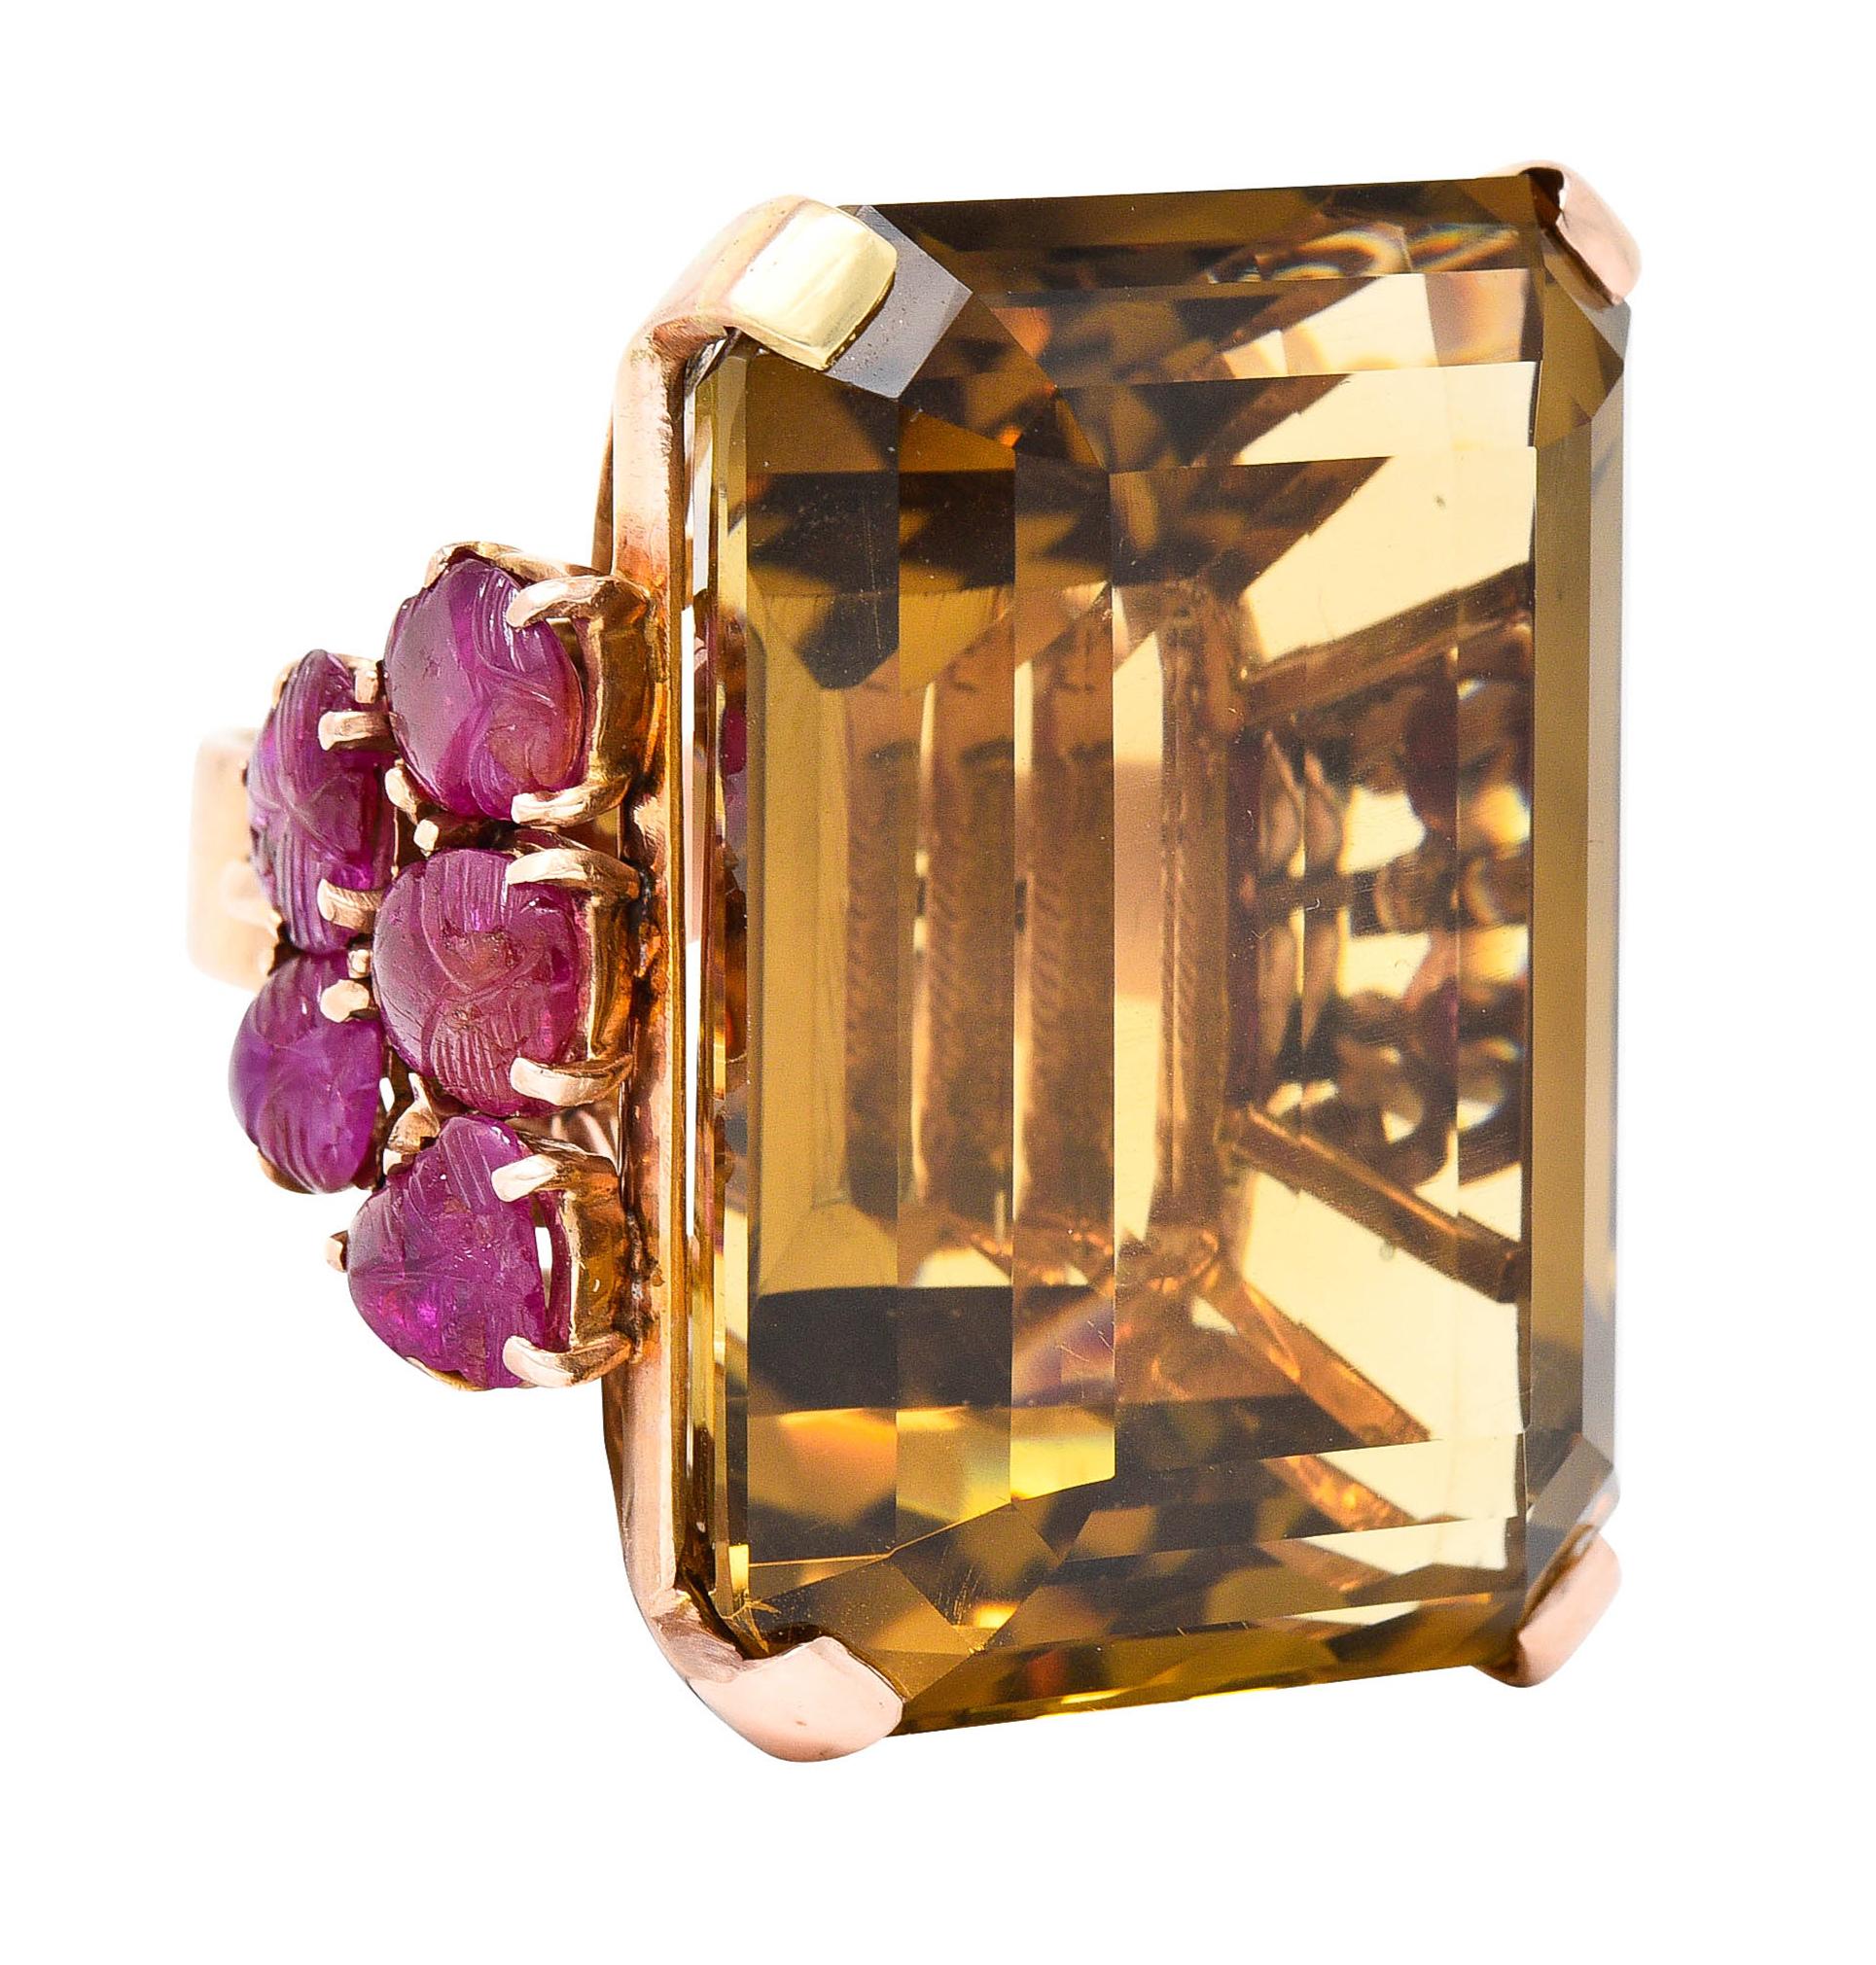 Featuring an emerald cut citrine measuring 34.0 x 24.8 mm

Basket set with strongly brownish orange color - eye clean

Flanked by stylized cathedral shoulders with scrolled volutes

Decorated with Mughal carved rubies depicting leaves

Rubies are